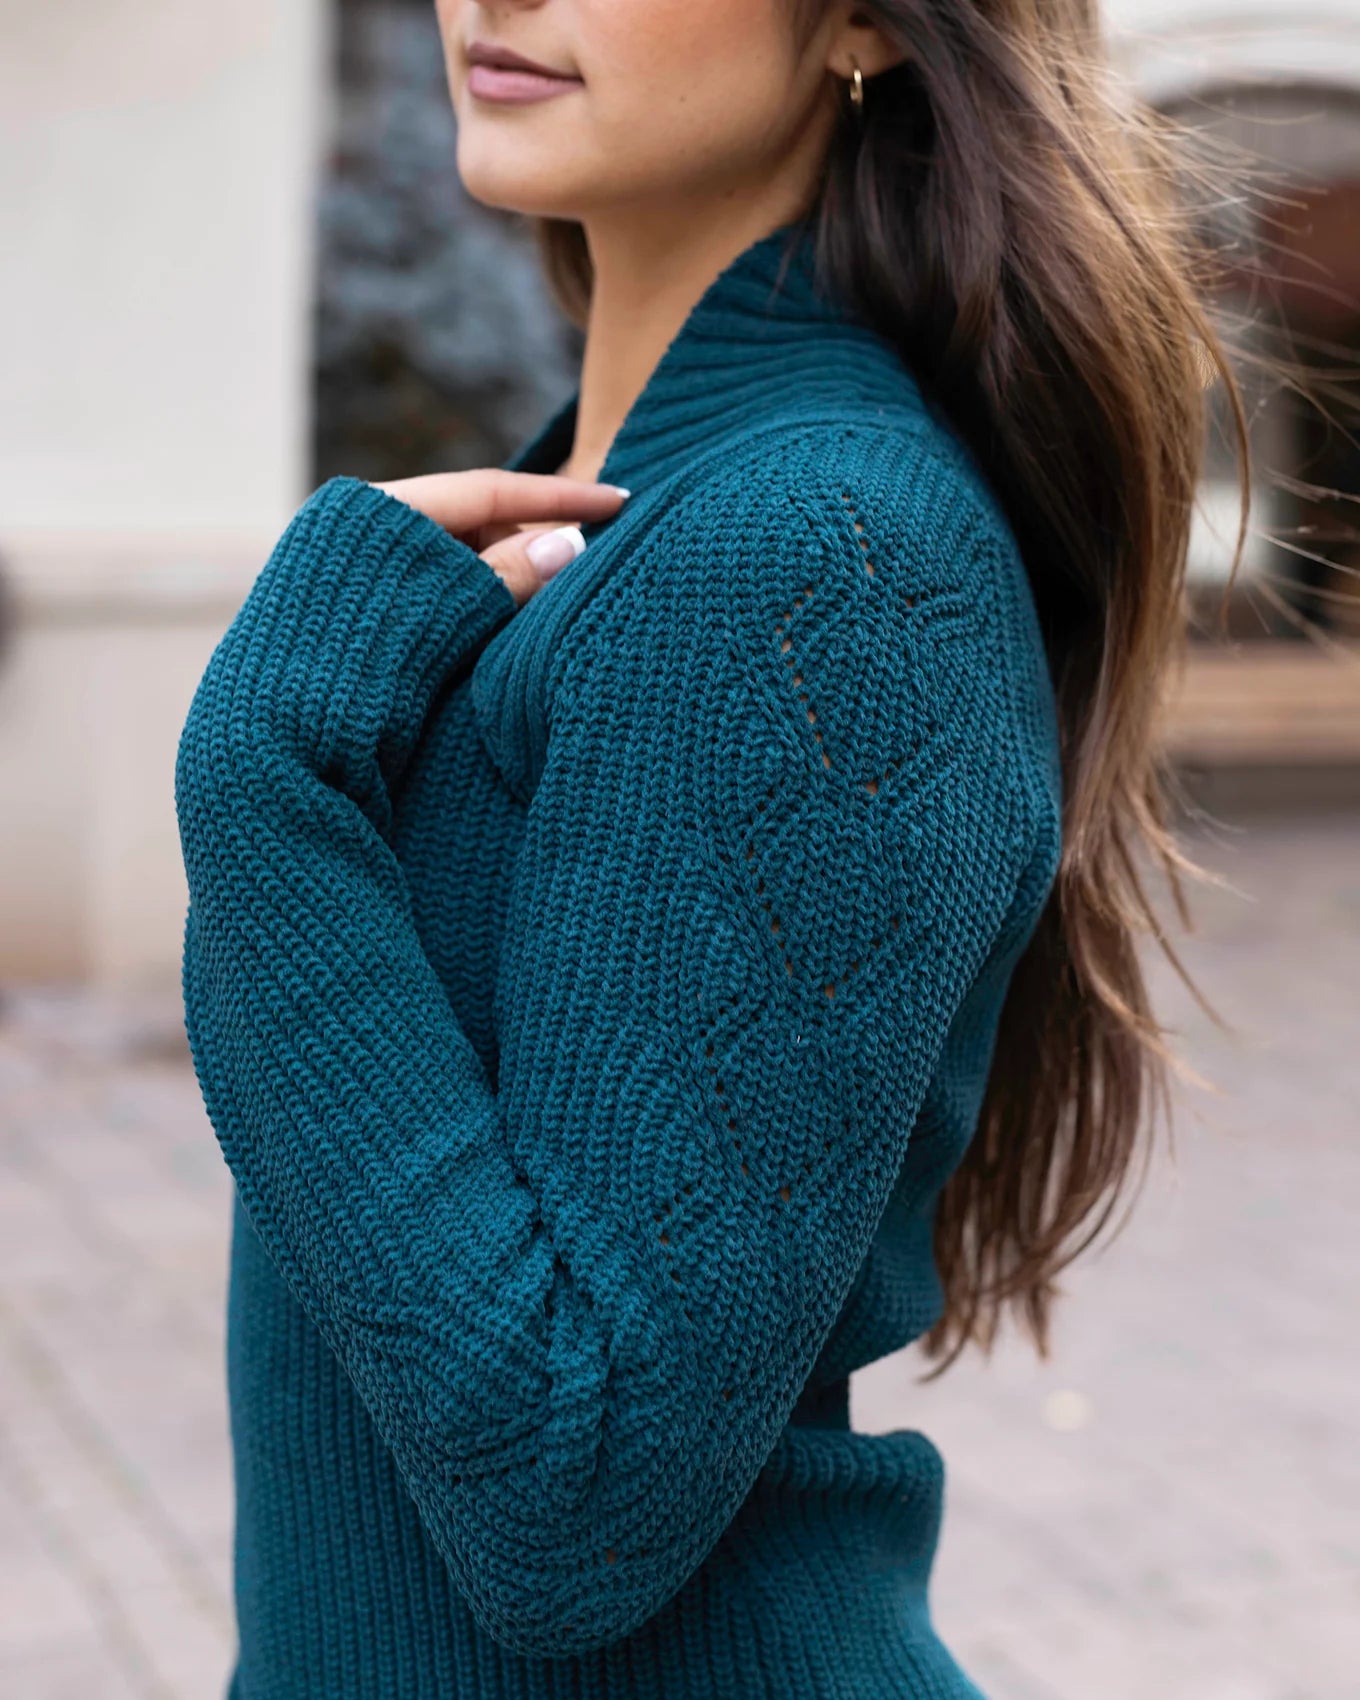 Deep Teal Cabled Sleeve Shrug Sweater by Grace & Lace